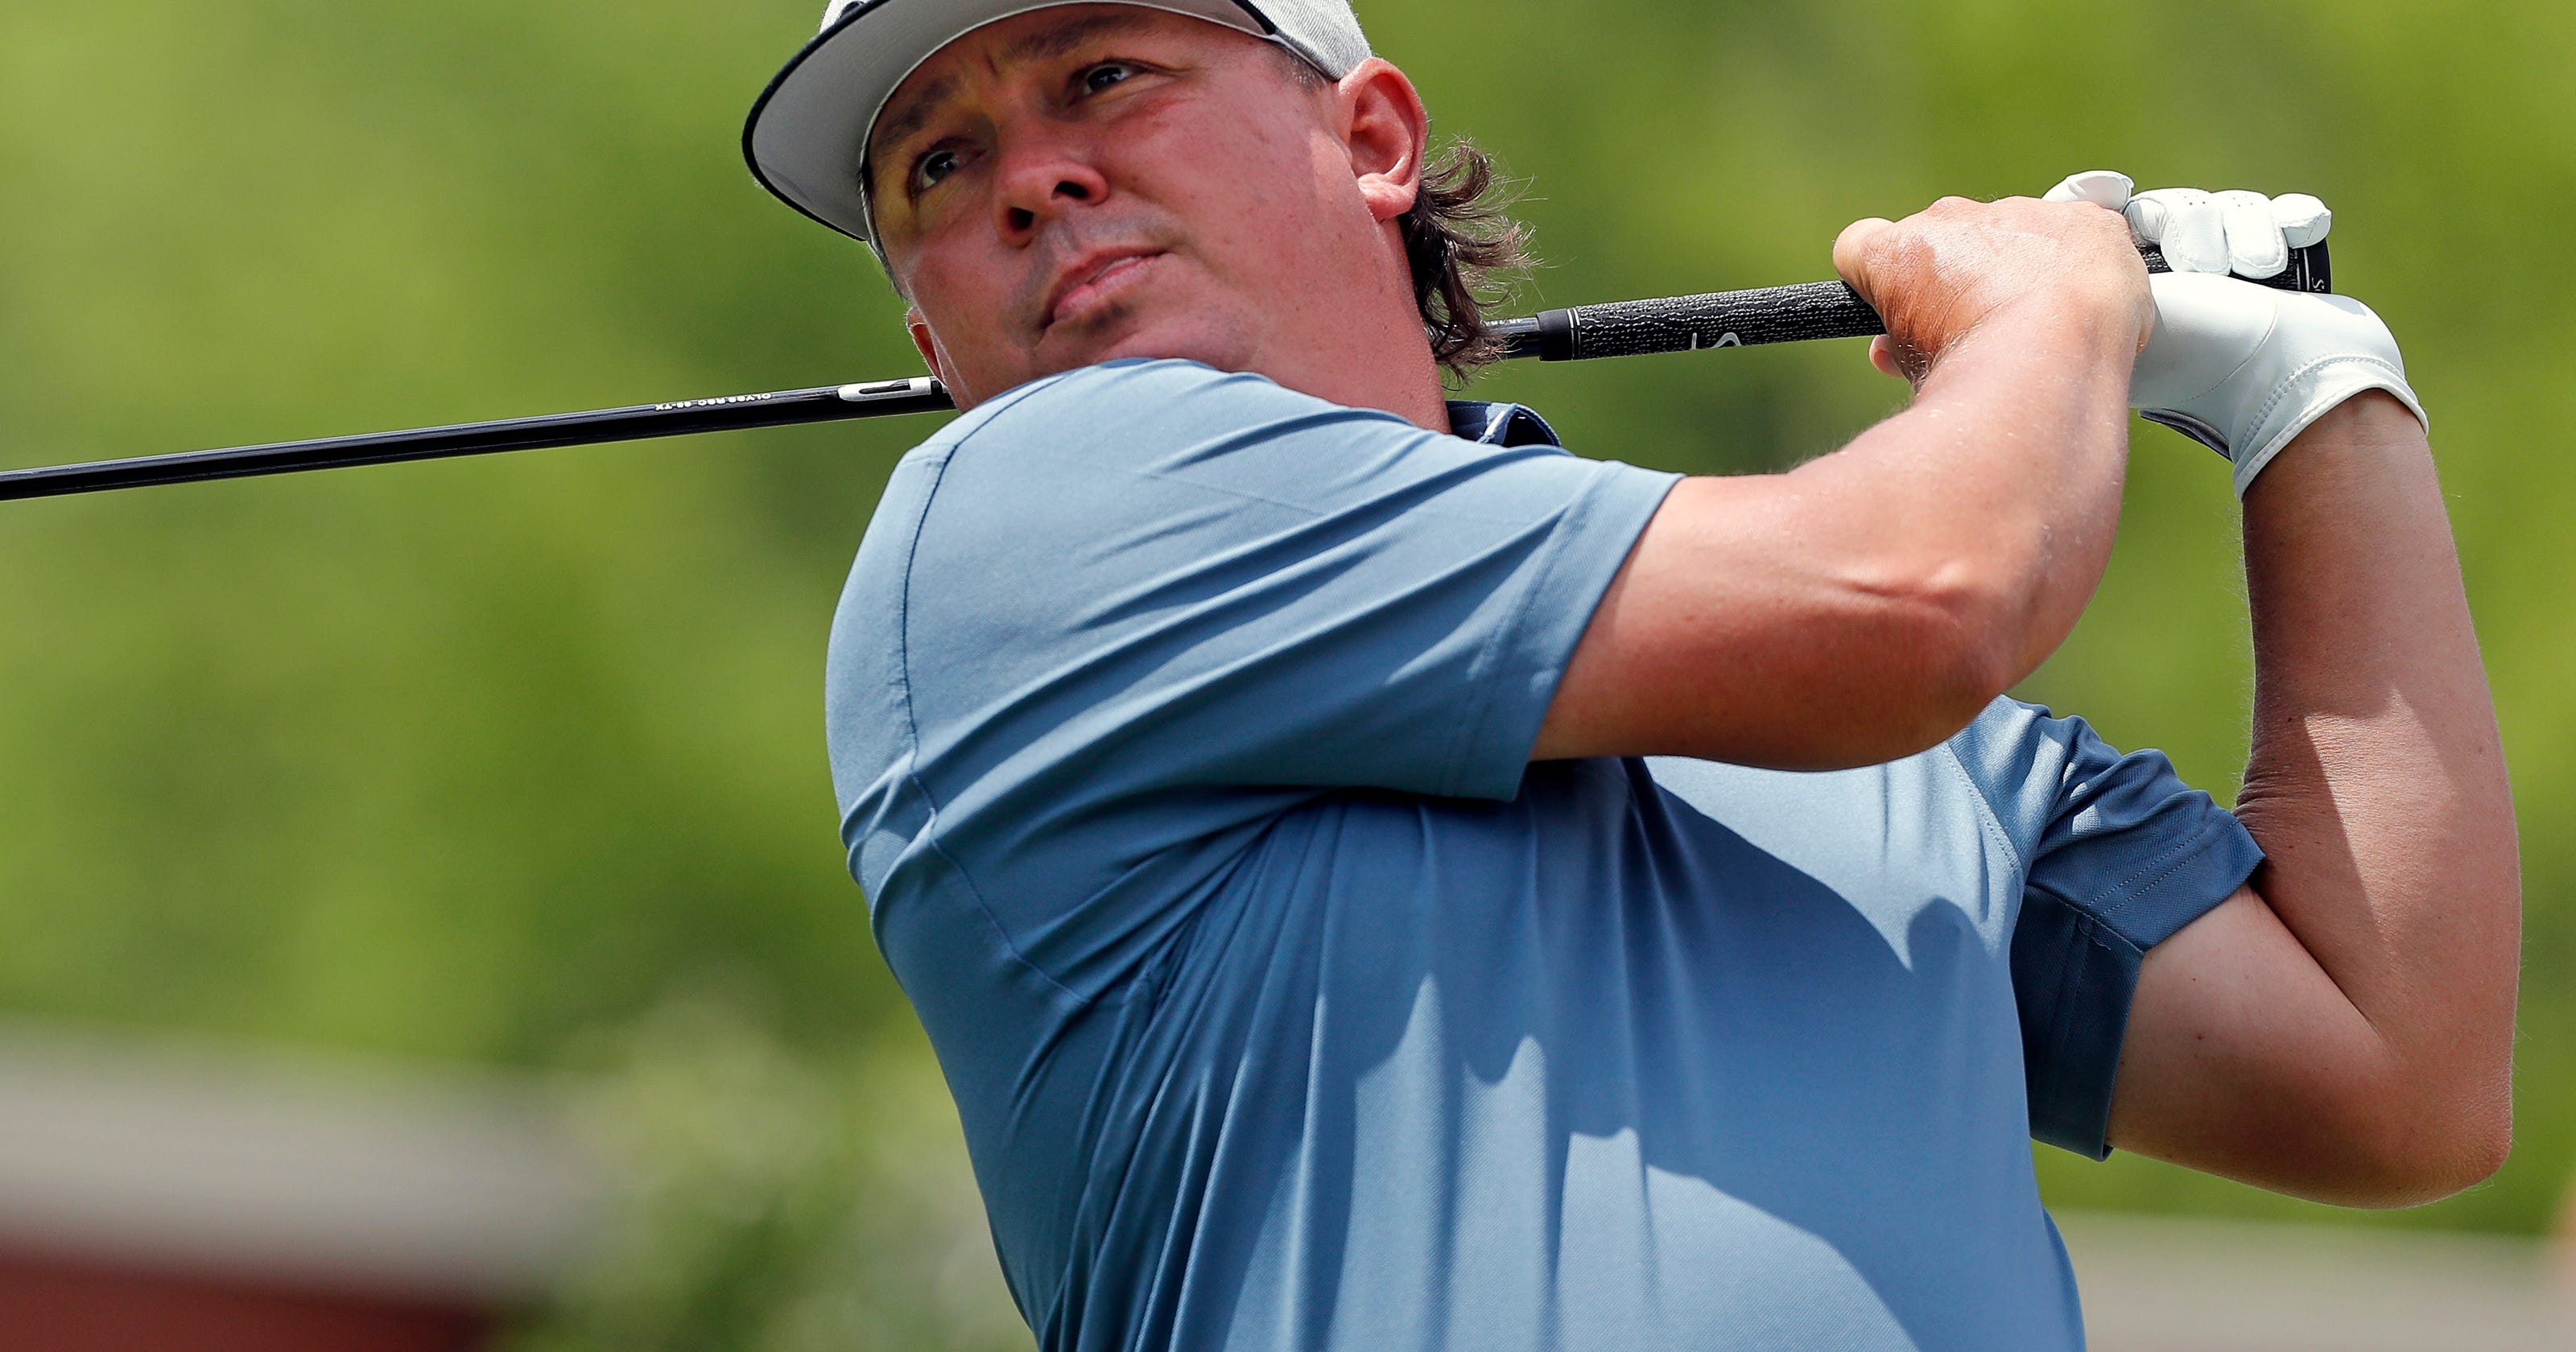 Dufner among 60 players who make it into U.S. Open through